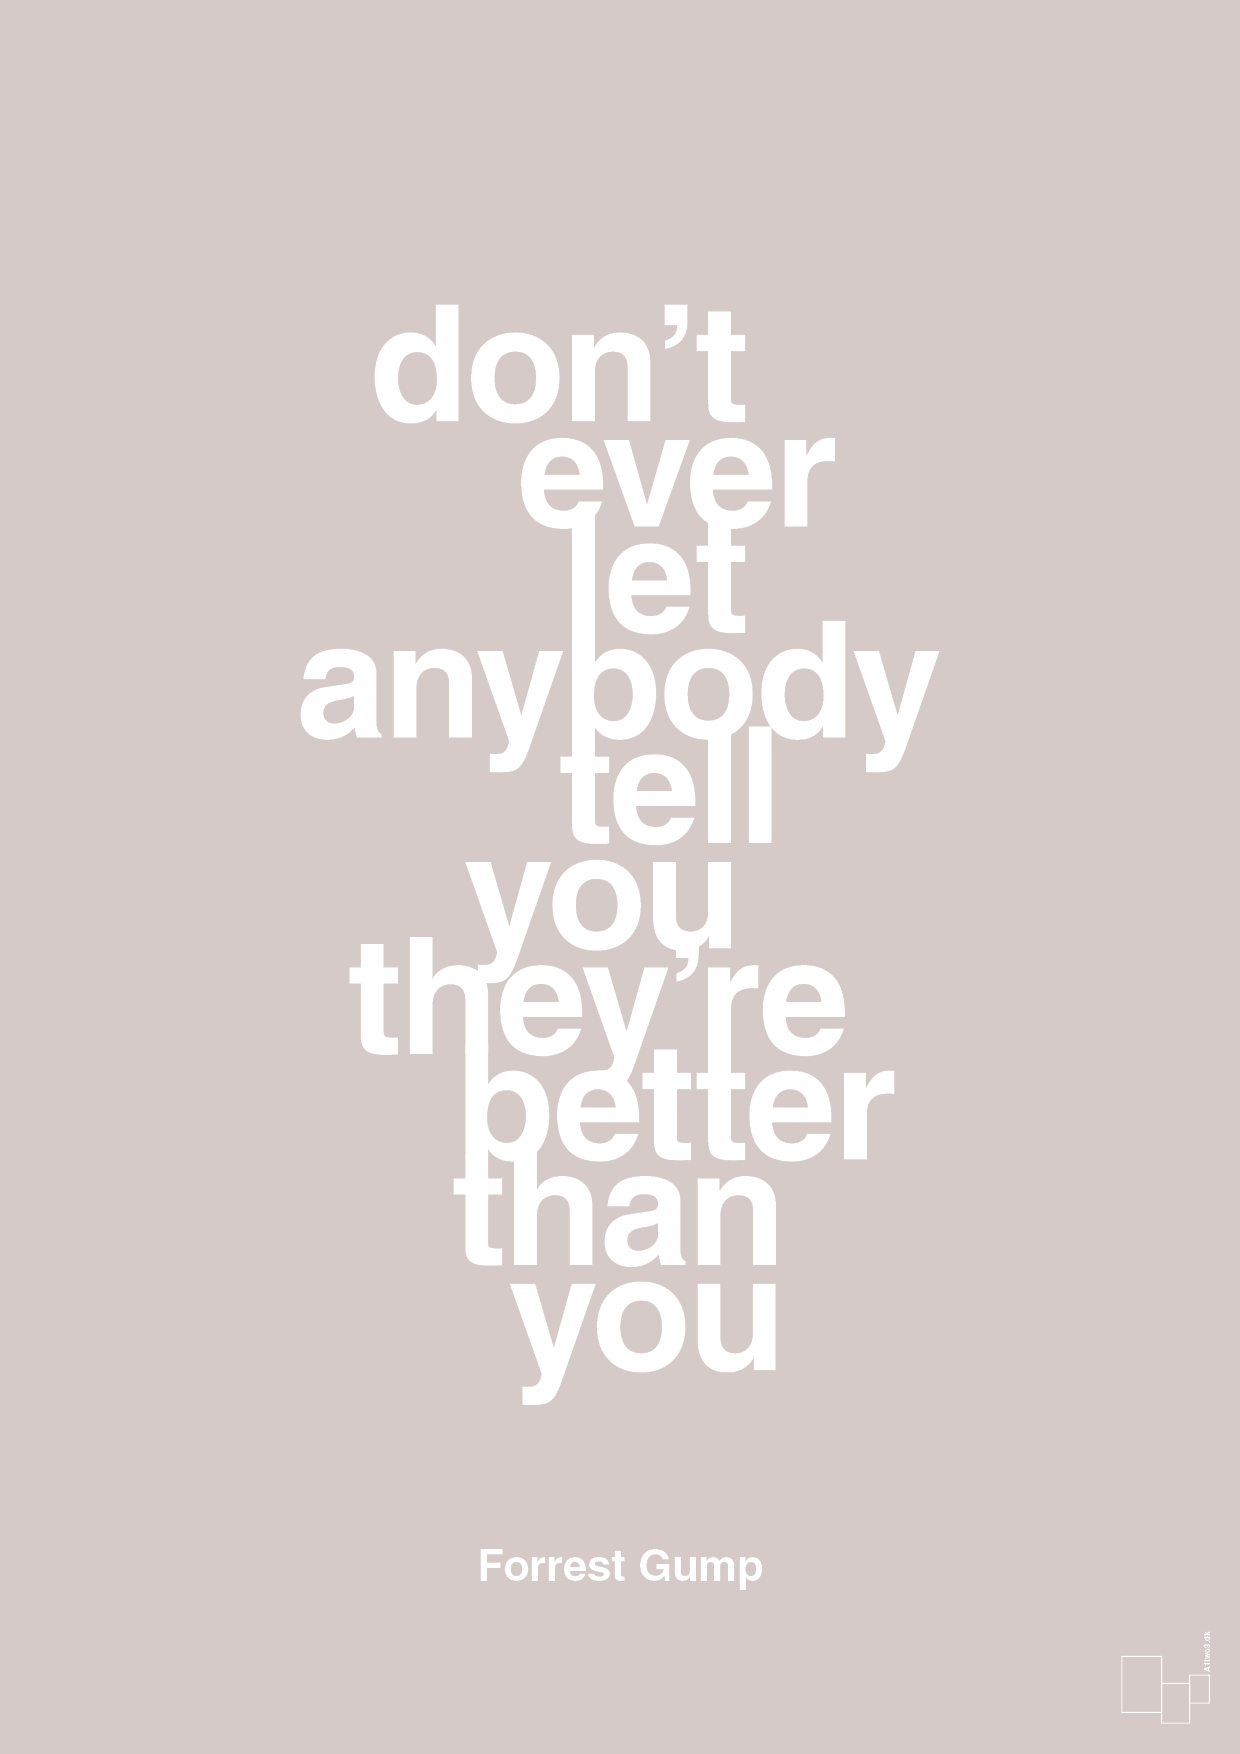 don’t ever let anybody tell you they’re better than you - Plakat med Citater i Broken Beige